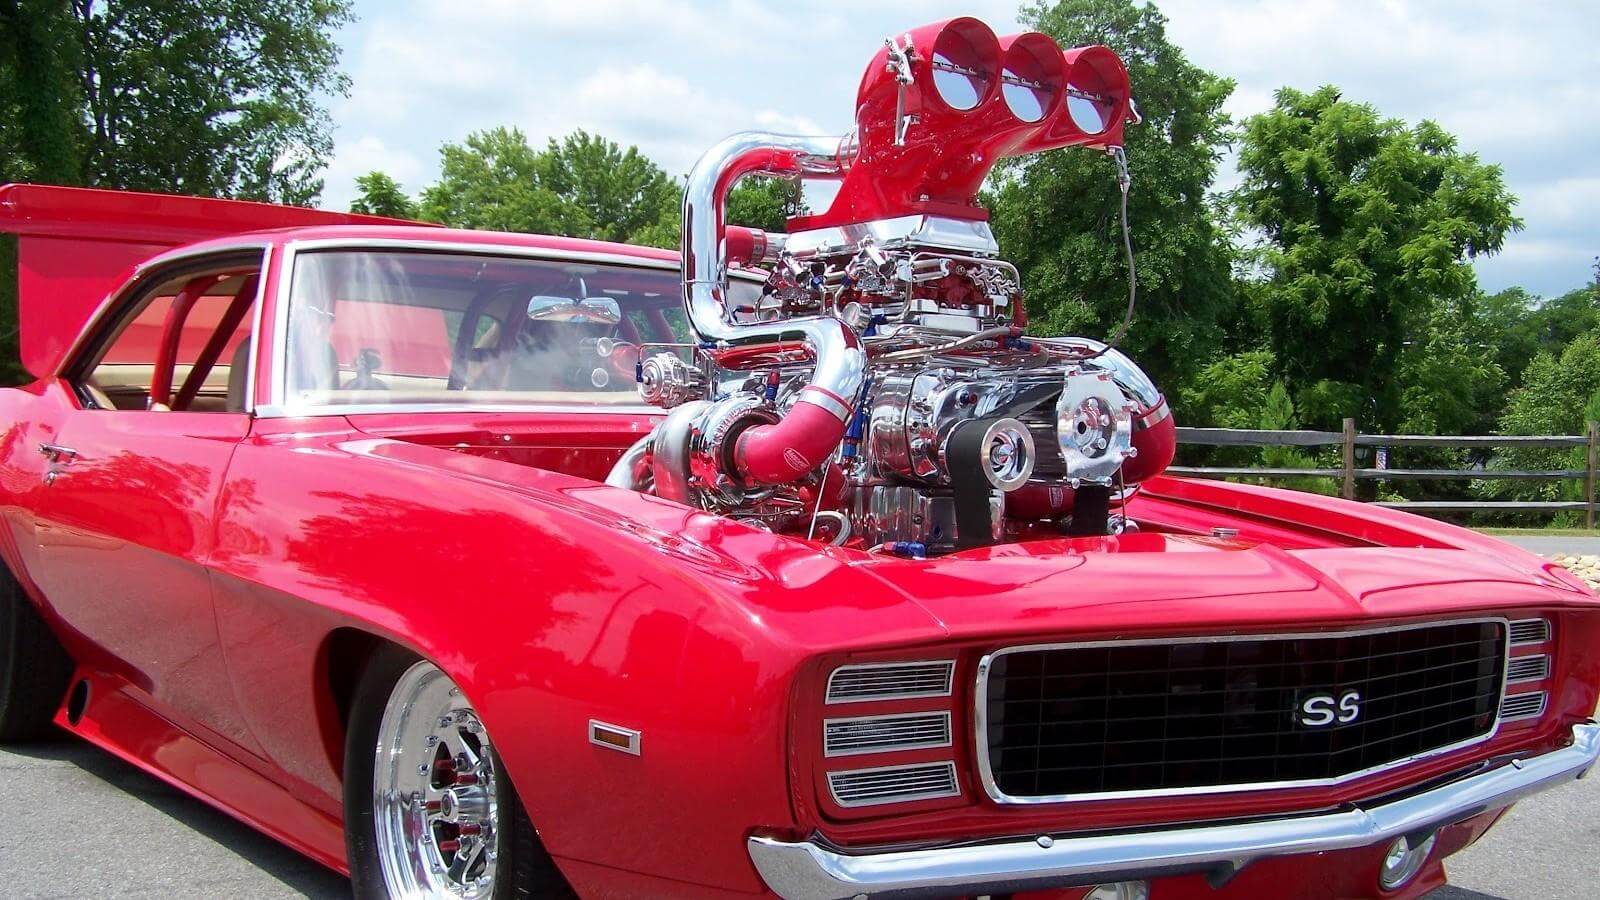 Here Is The Muscle Car Engine Showdown From Around The World